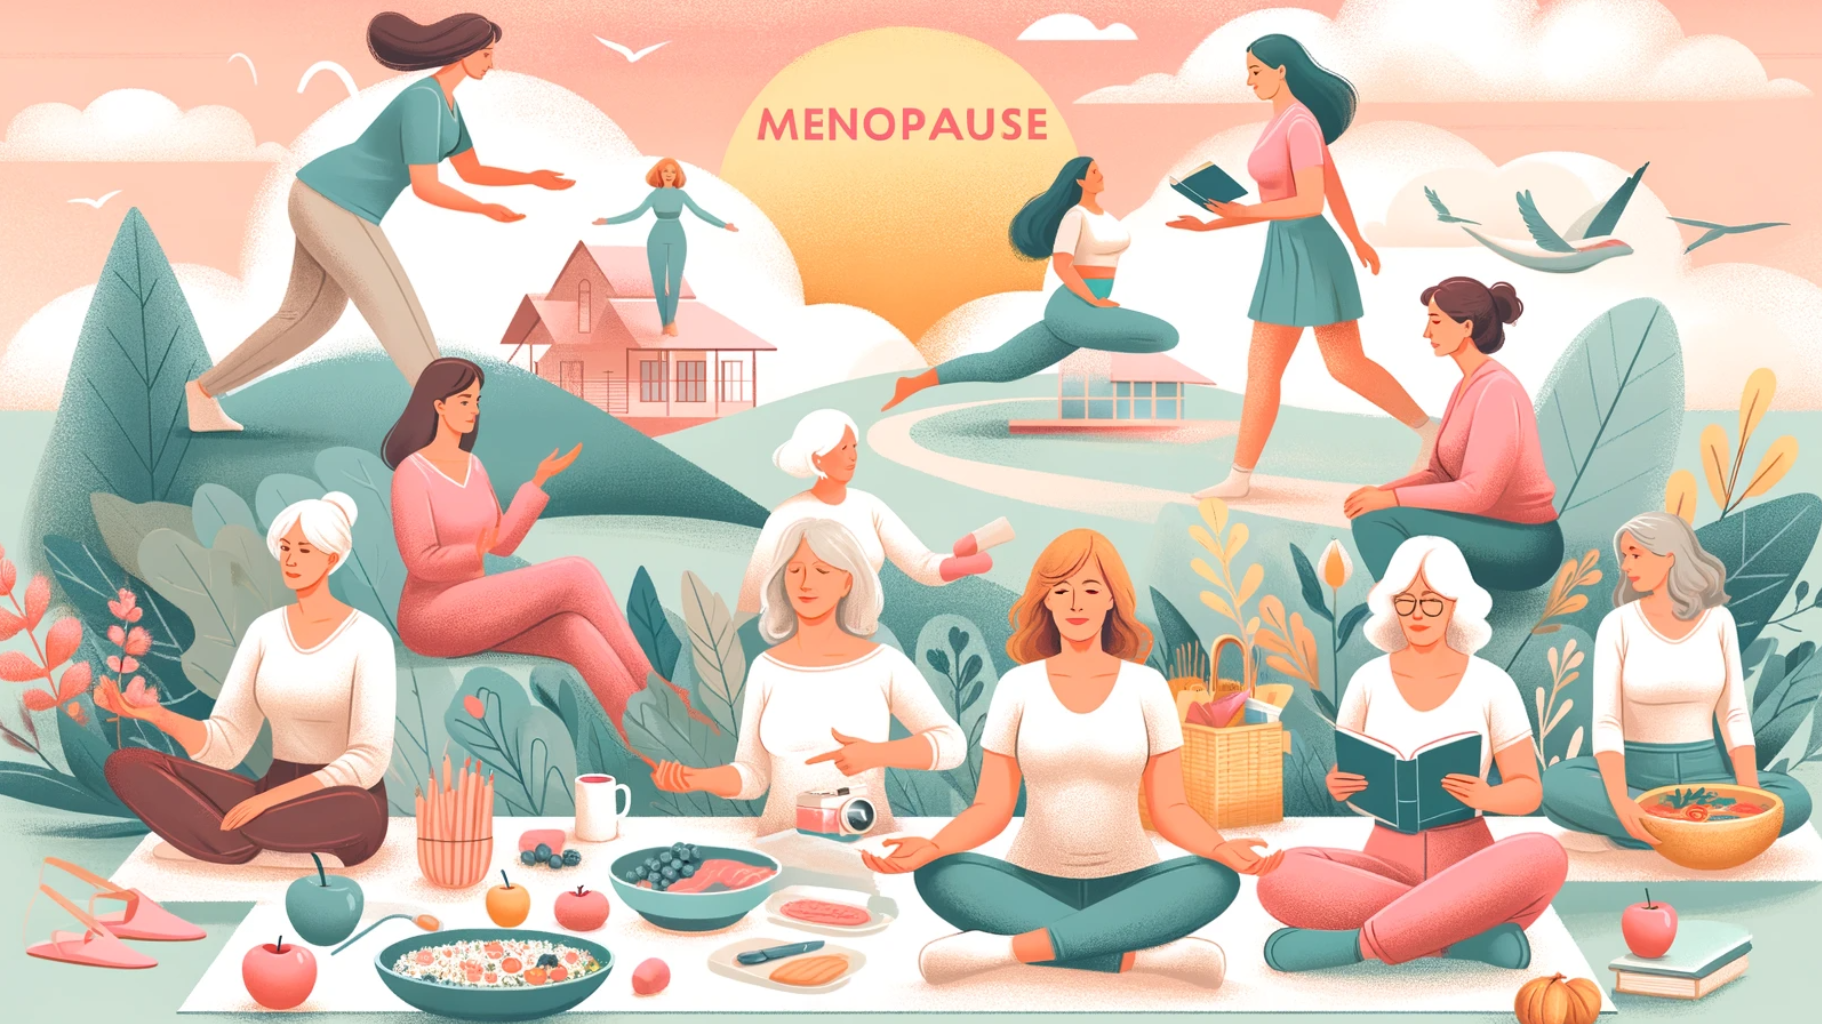 Empower Yourself: Menopause, Stress Relief & Self-Care